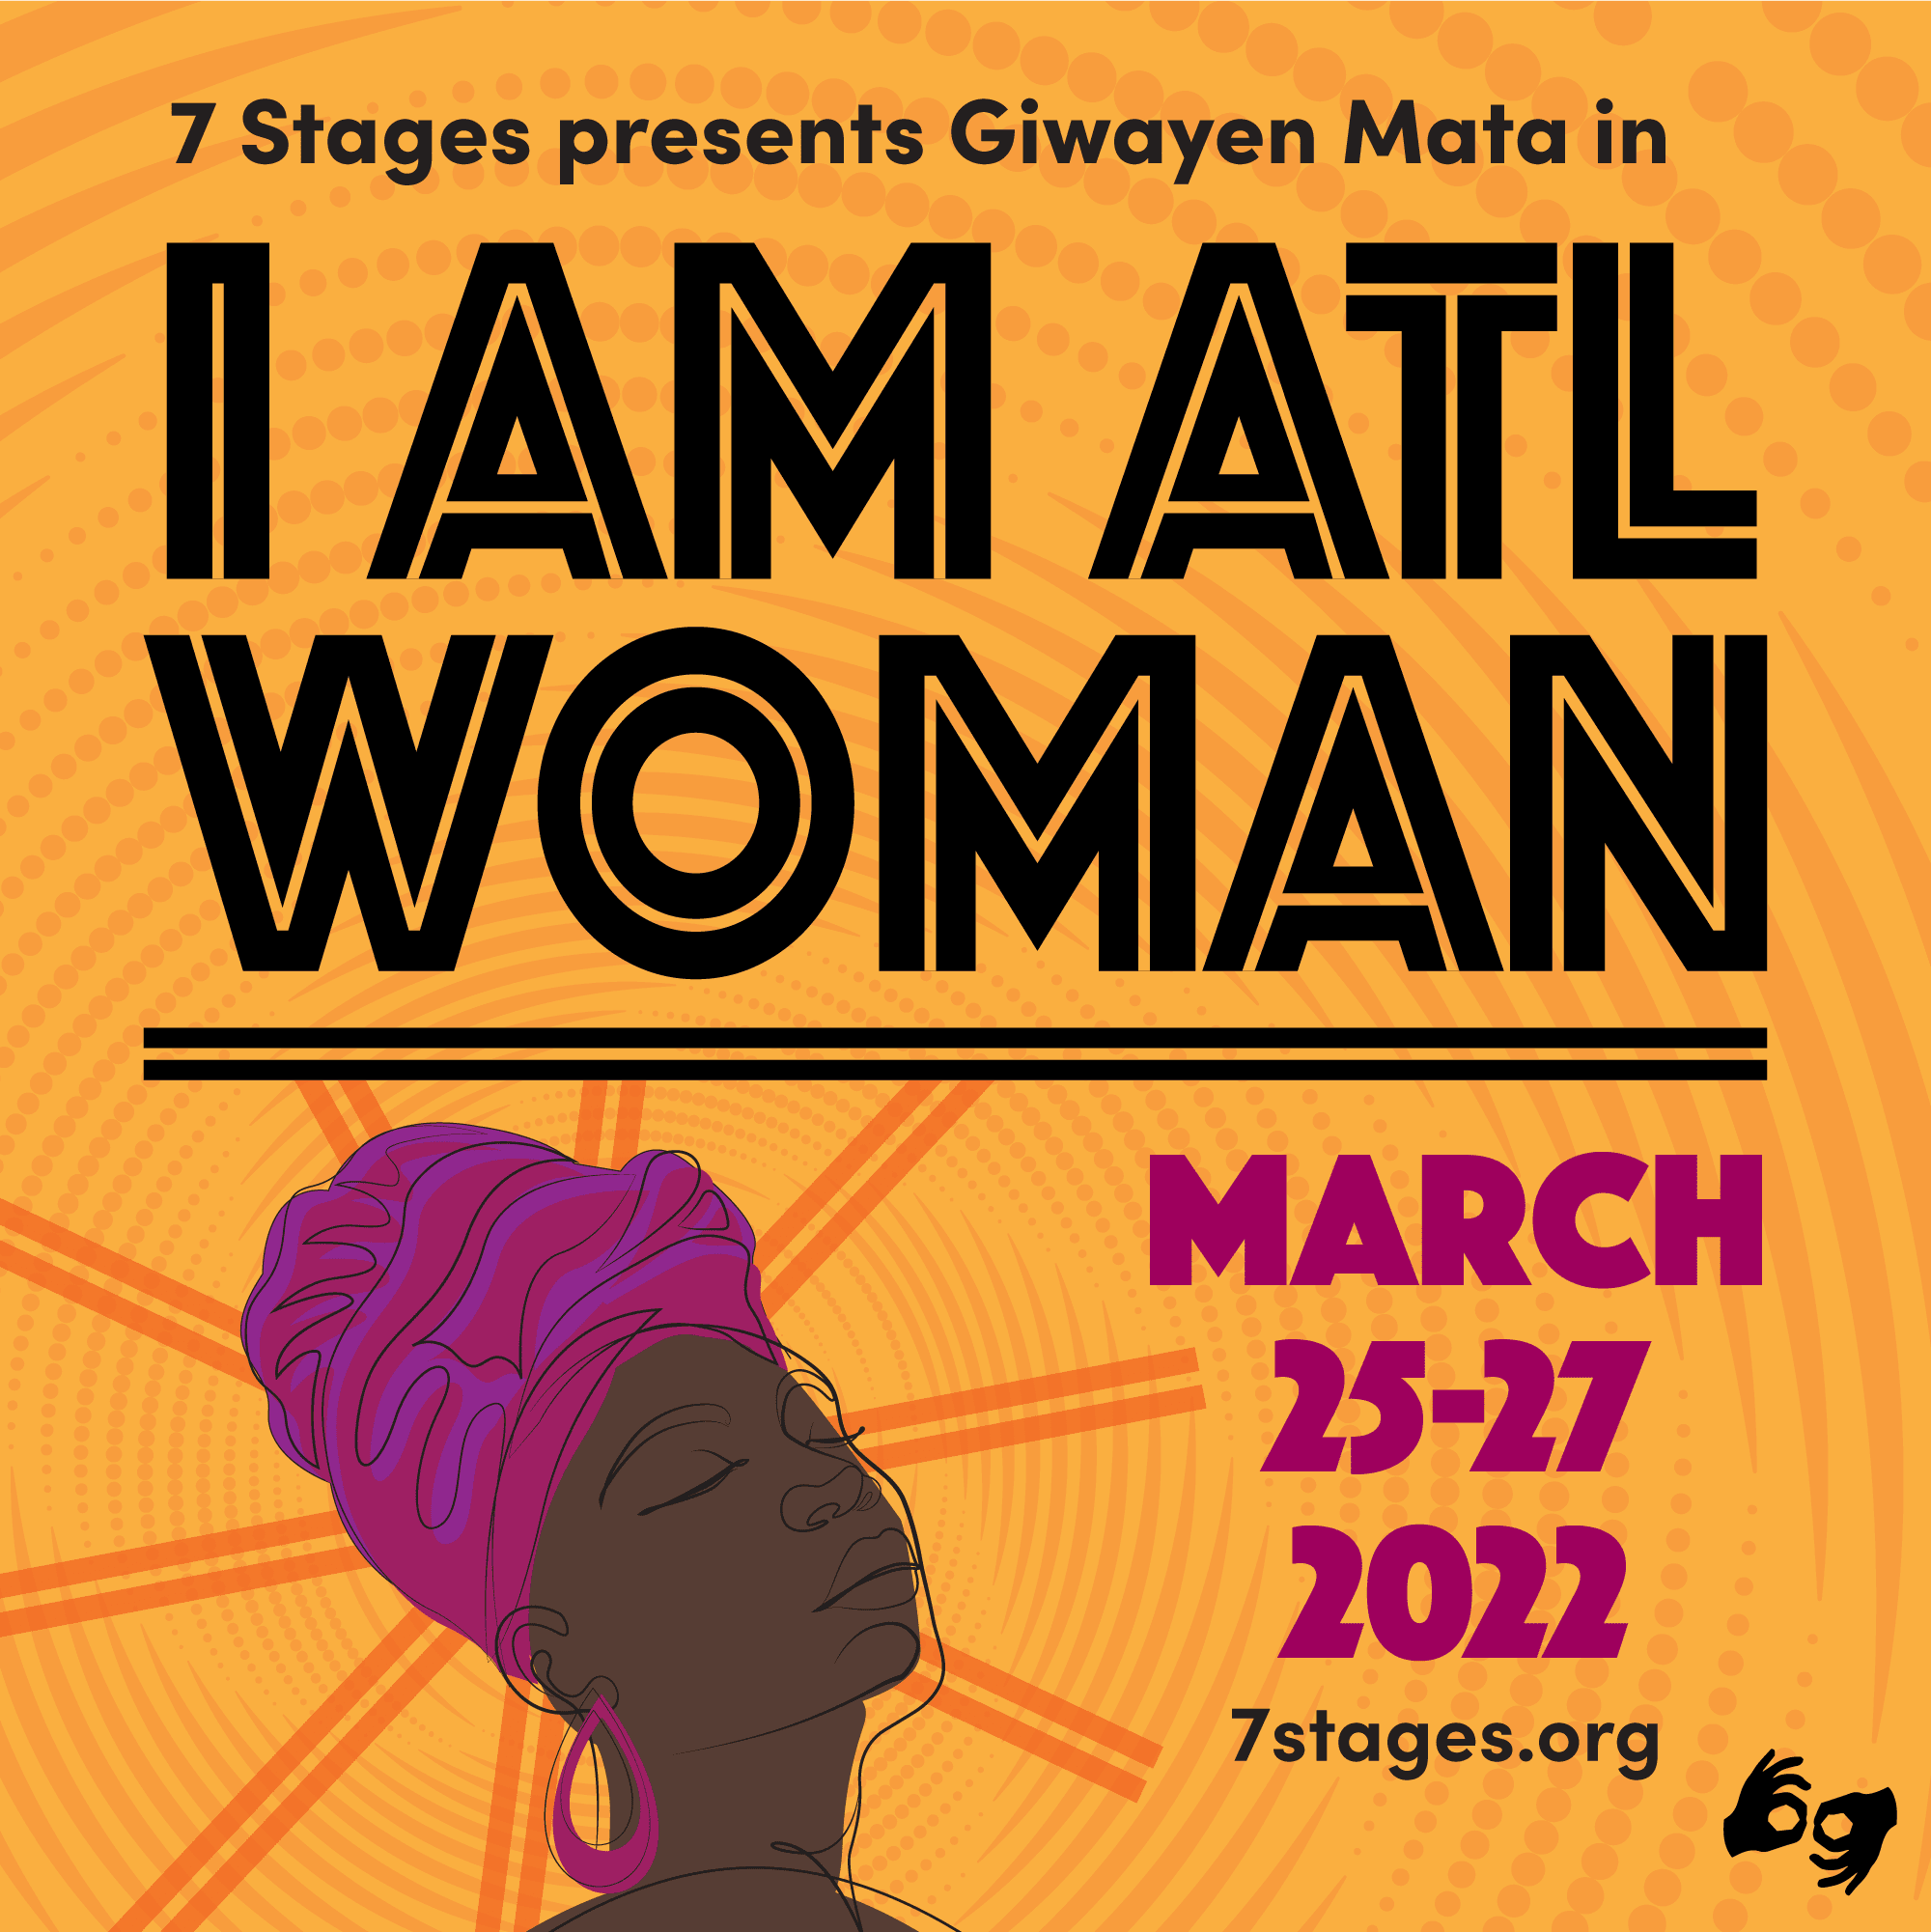 I AM ATL Woman. March 25-27, 2022. 7 Stages.org.